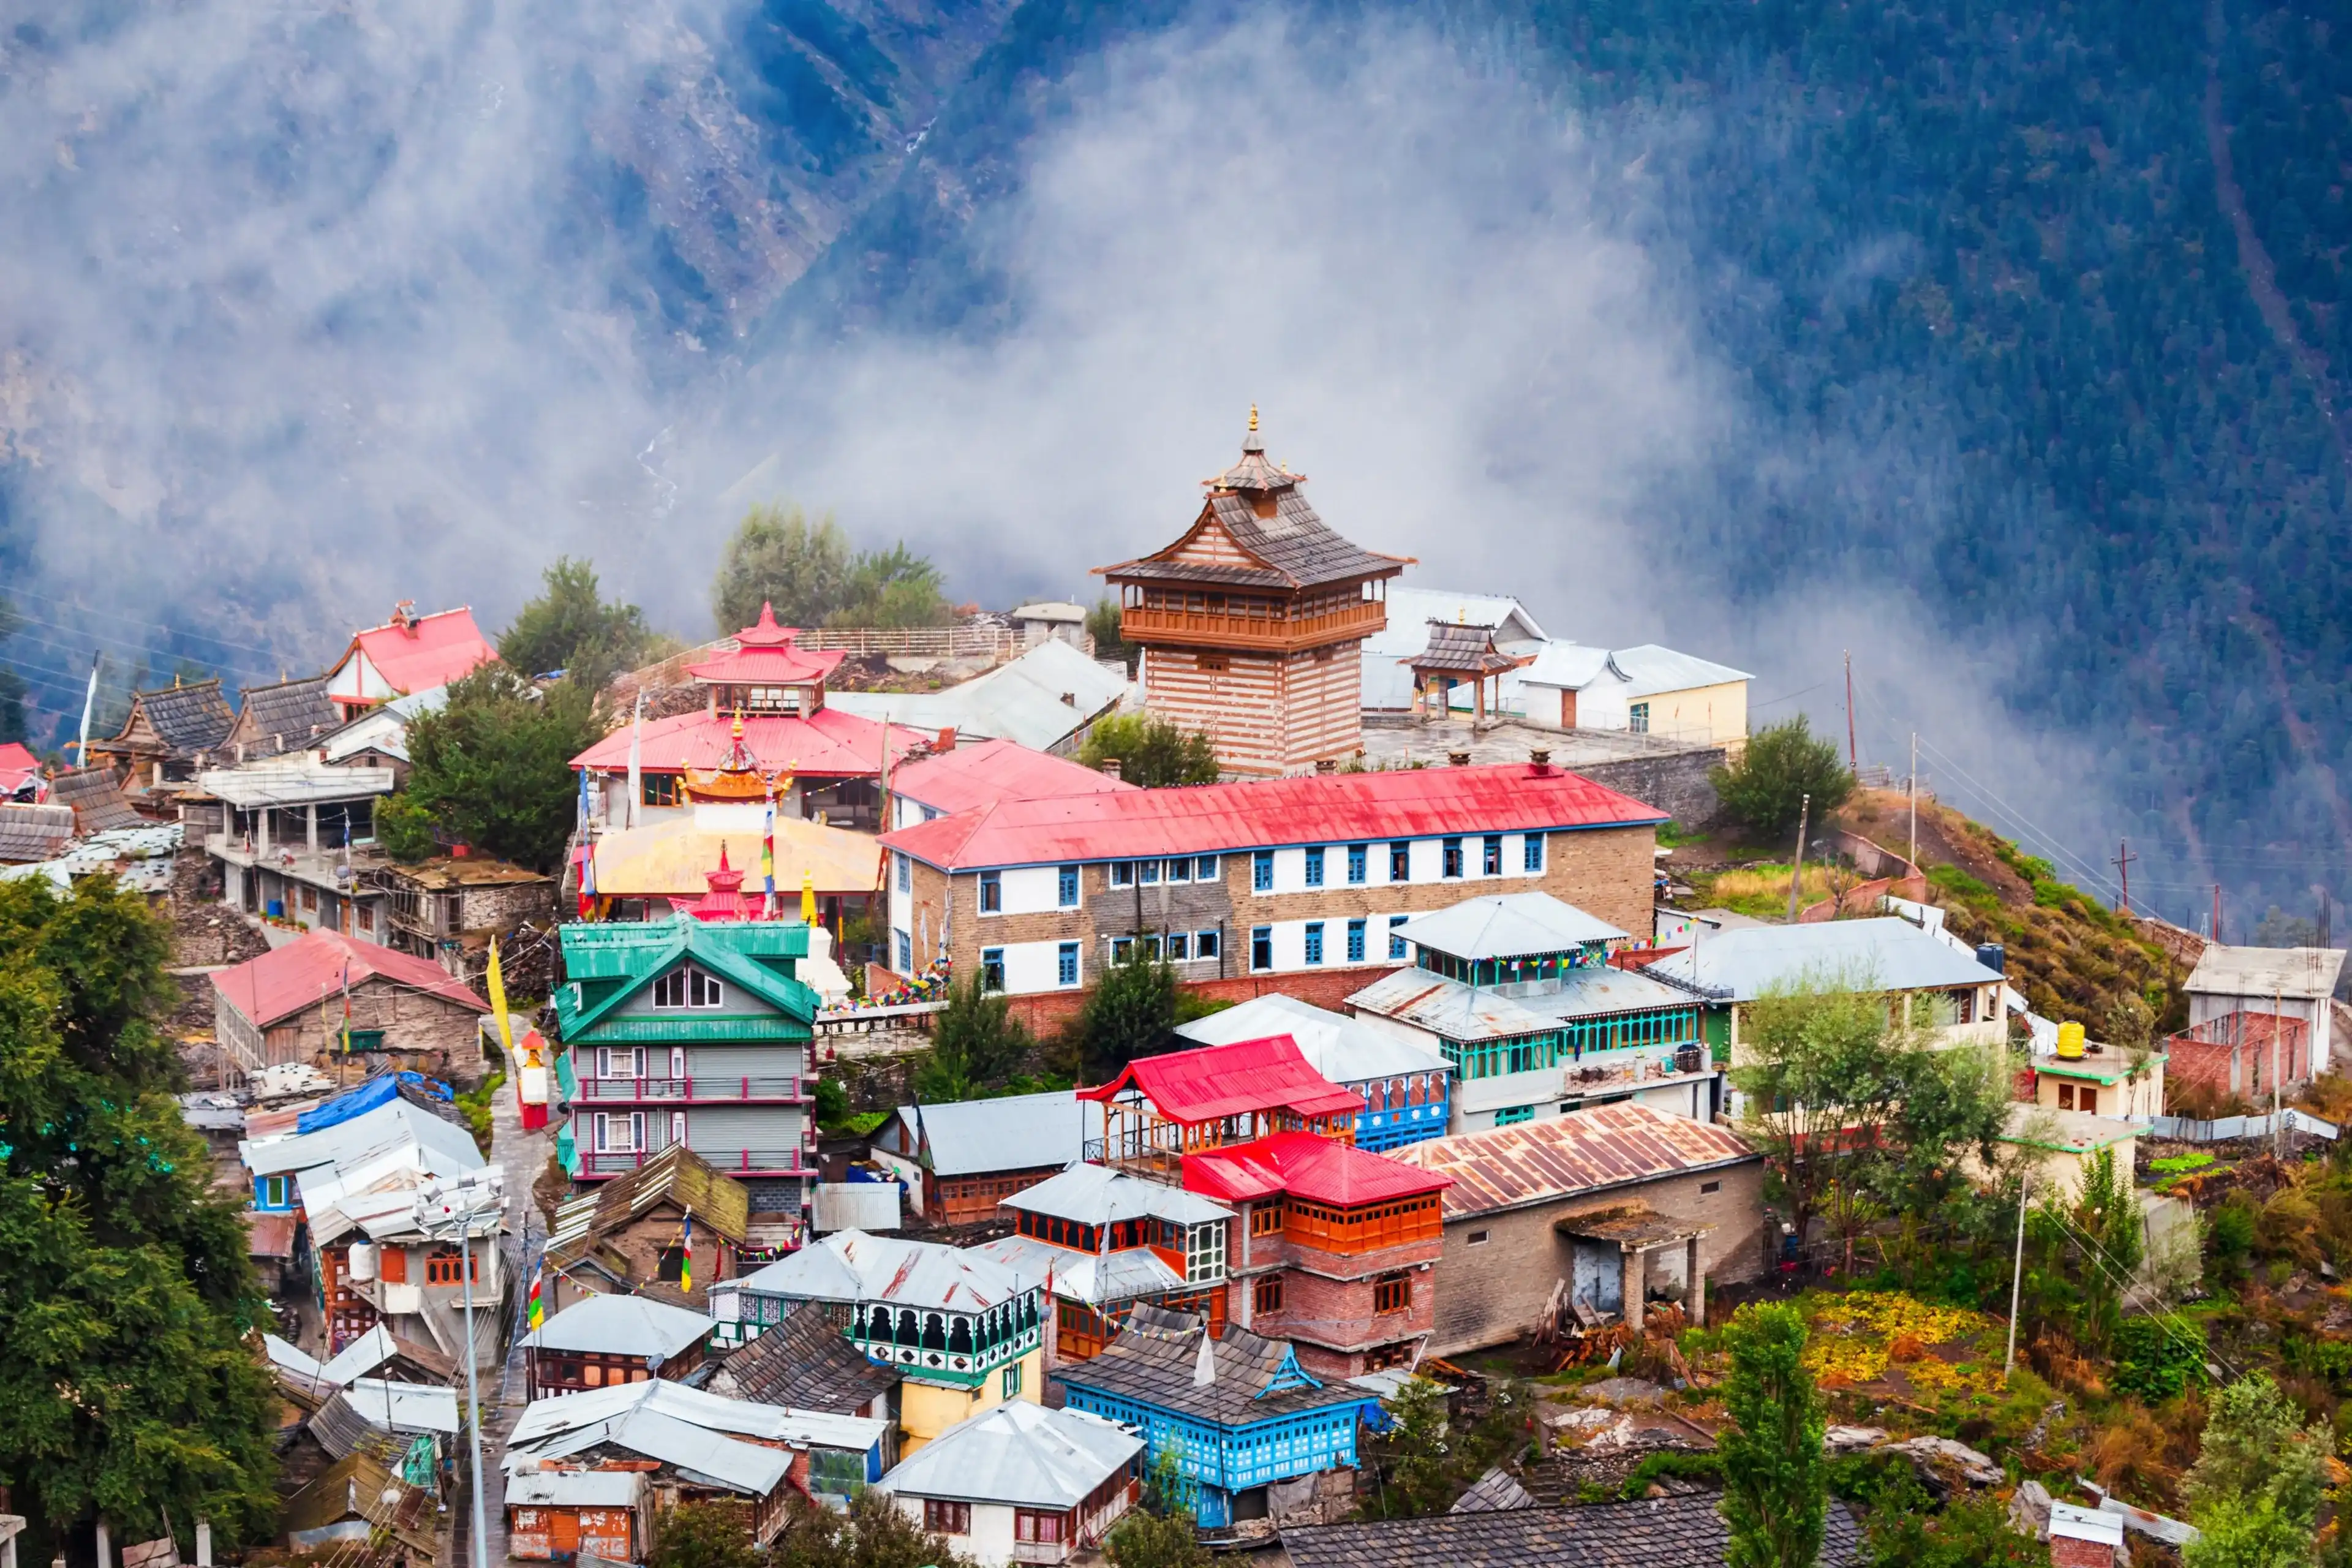 Kalpa and Kinnaur Kailash mountain aerial panoramic view. Kalpa is a small town in the Sutlej river valley, Himachal Pradesh in India